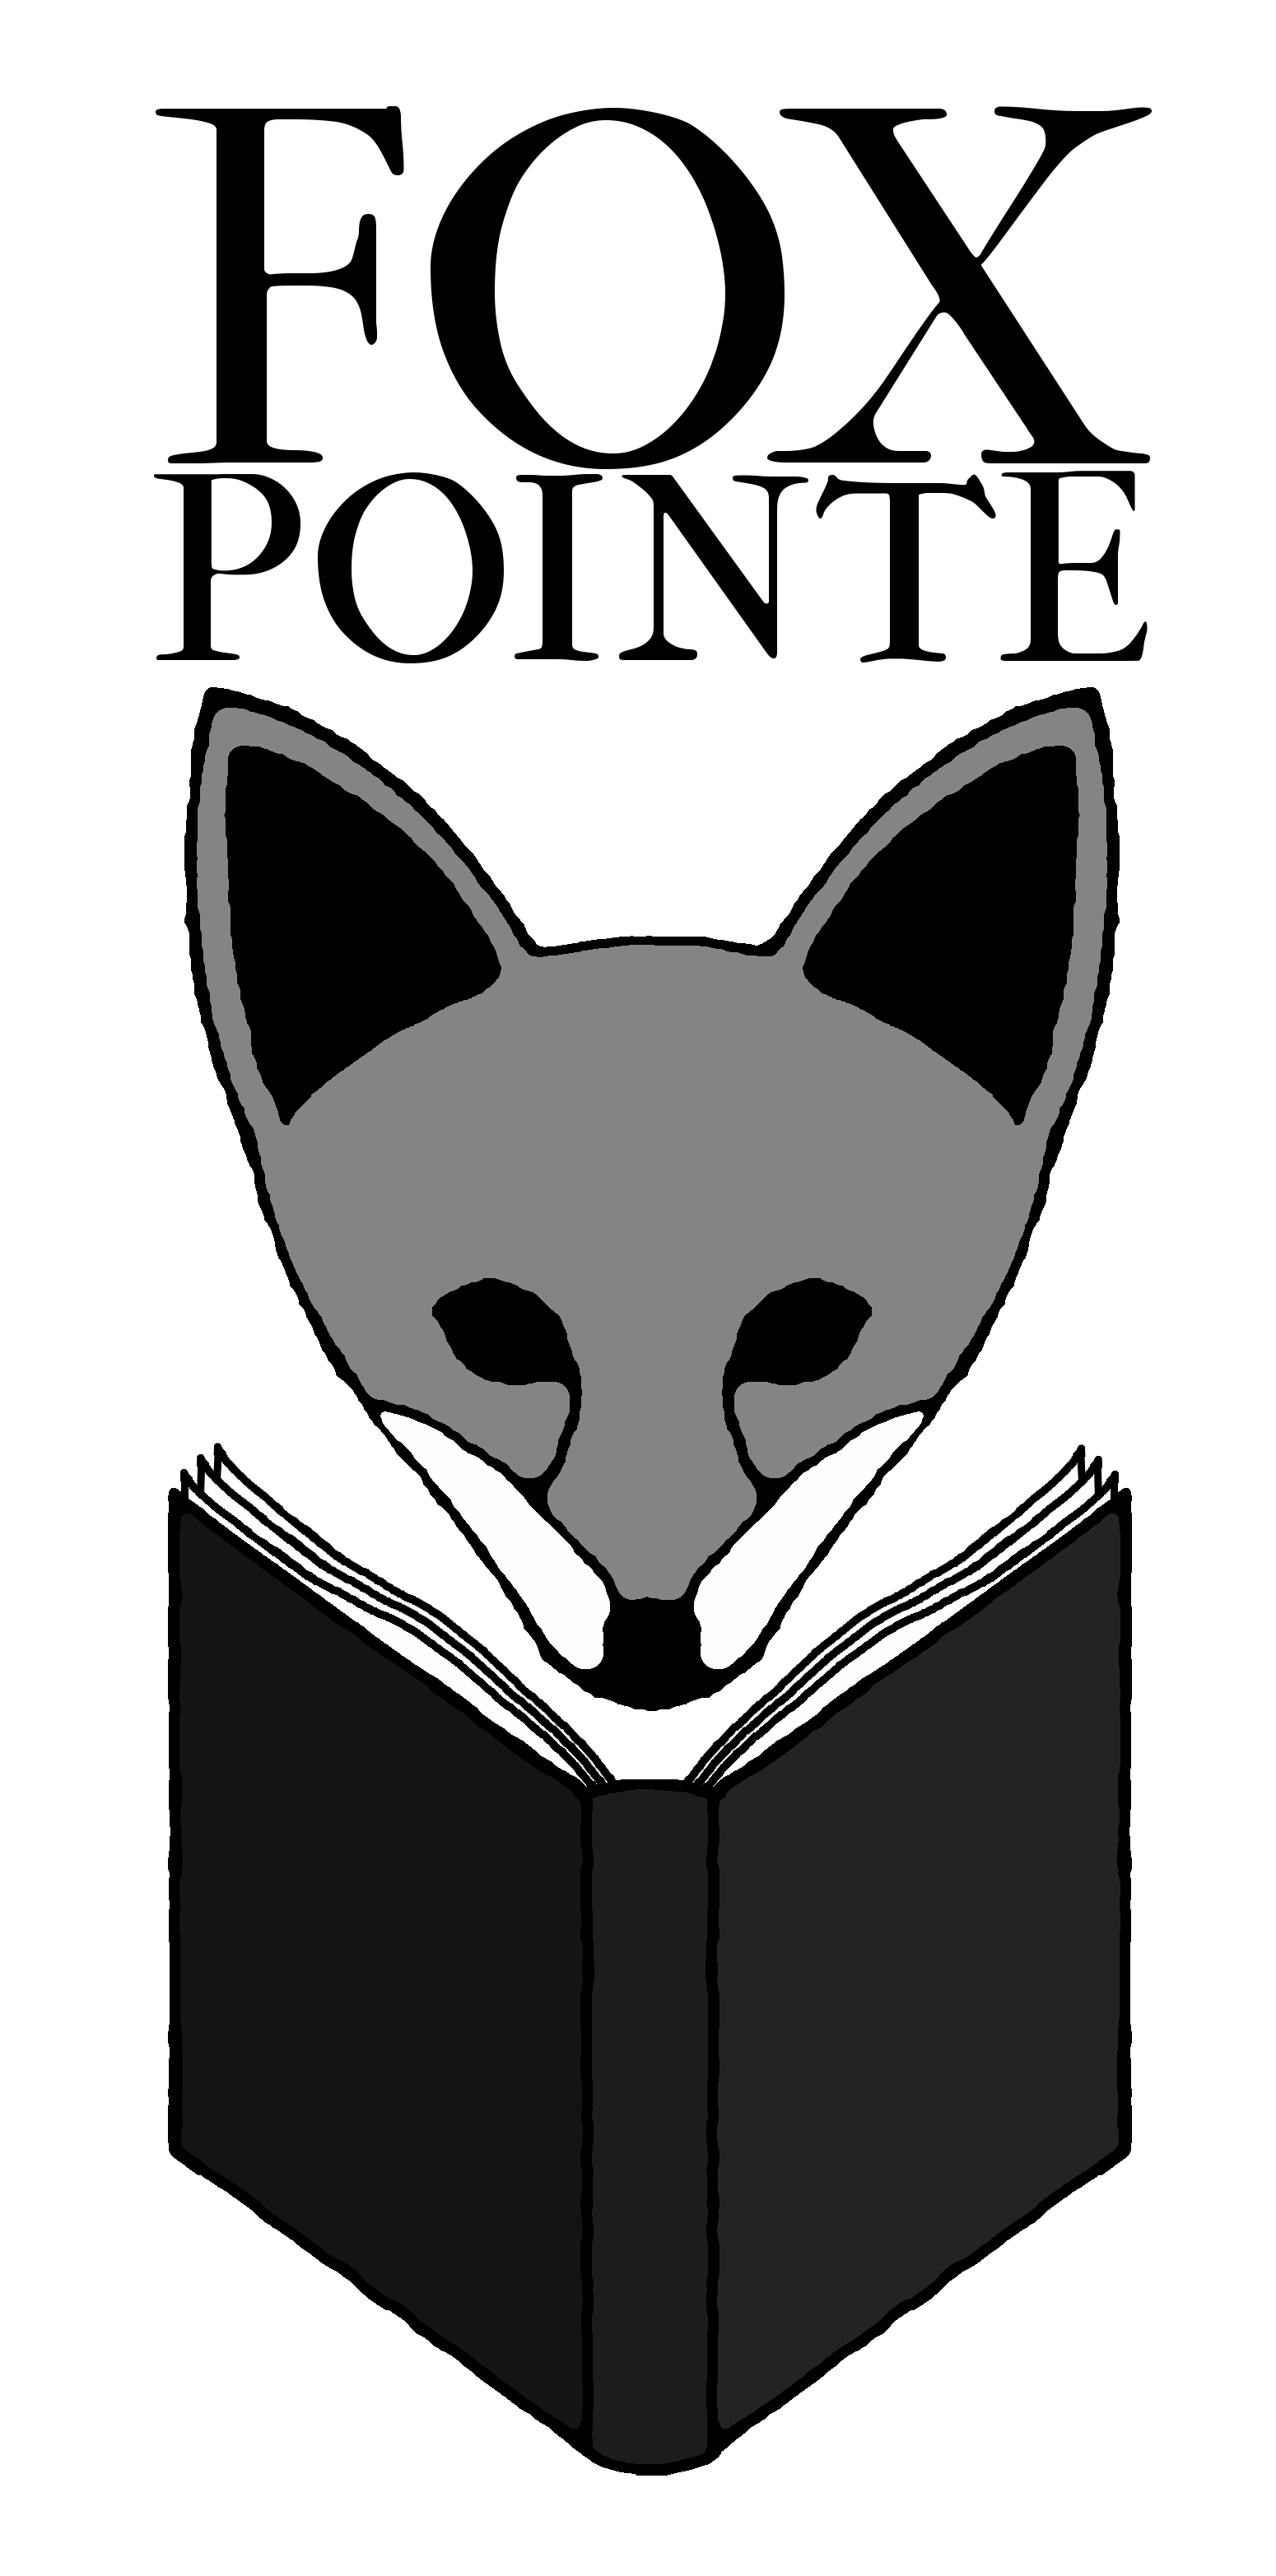 Fox Pointe Publishing, LLP is a full-service hybrid publisher at 20-30 books per year. #foxpointepublishing #NOTavanitypress #publishers #books #allgenres #hi